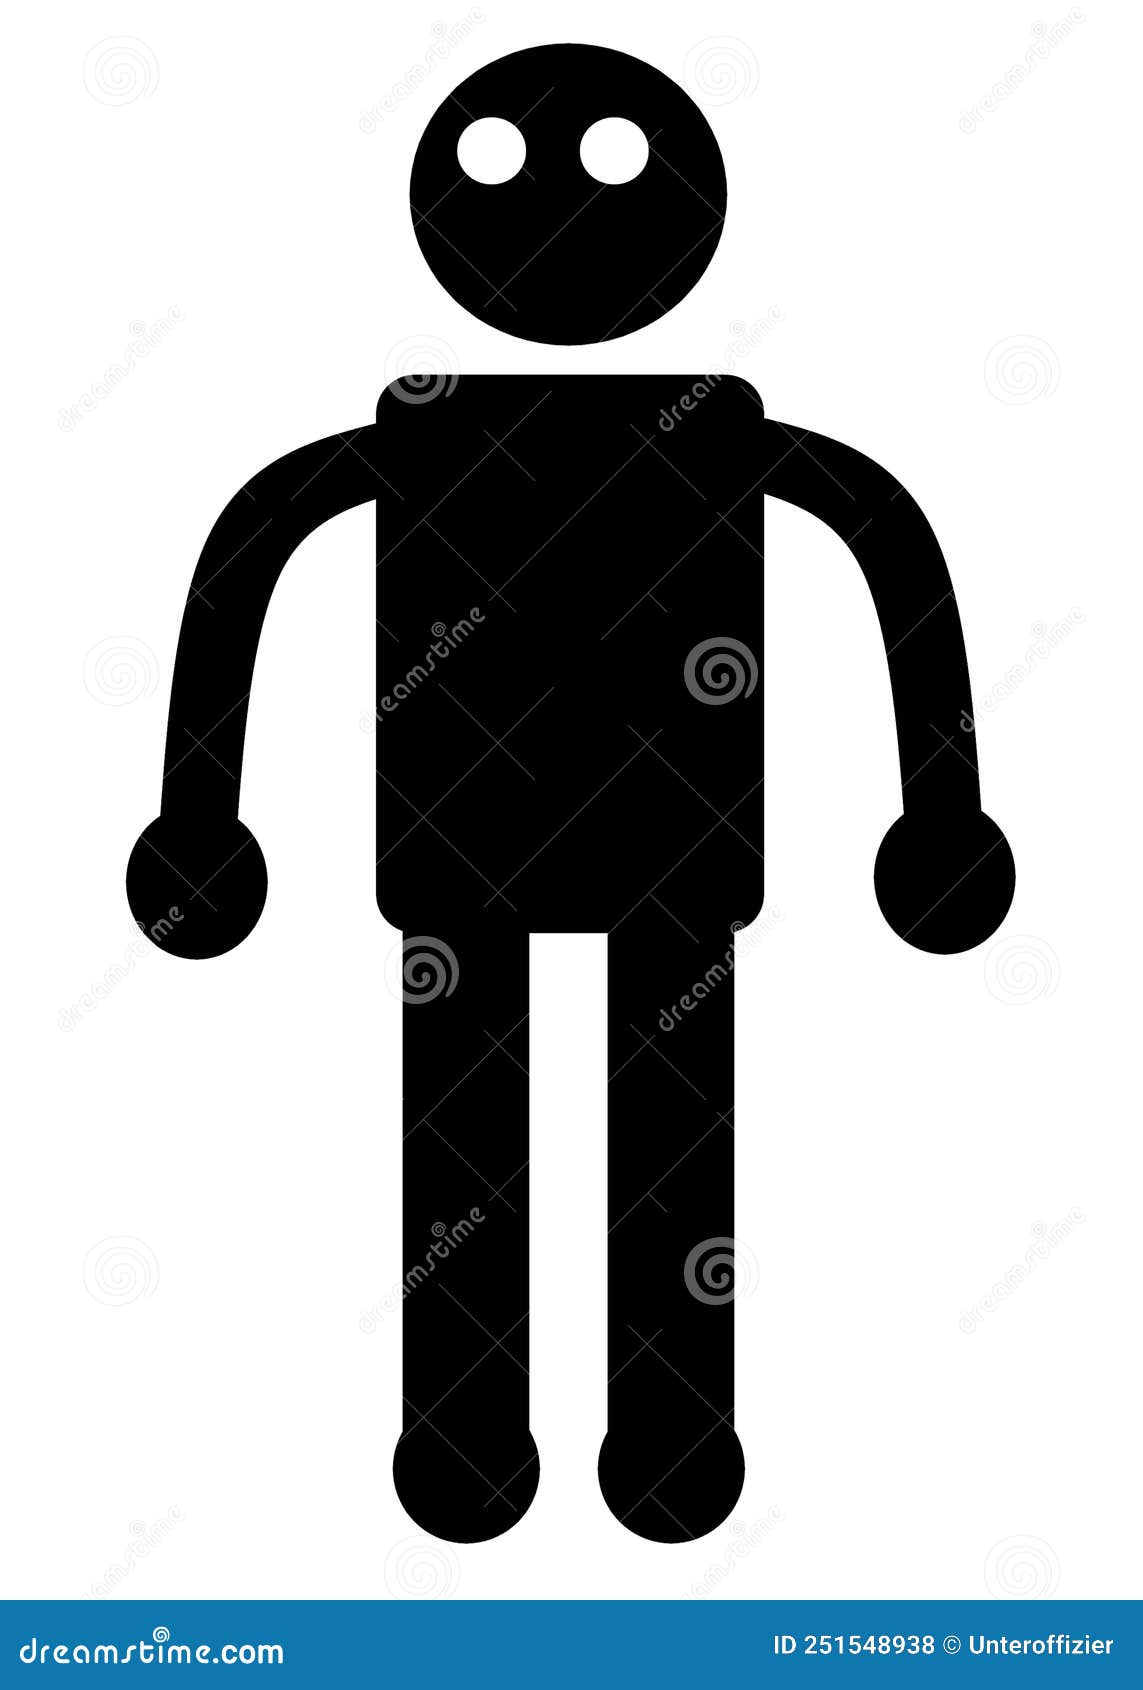 Free Vectors  Stickman-Game with 2 people